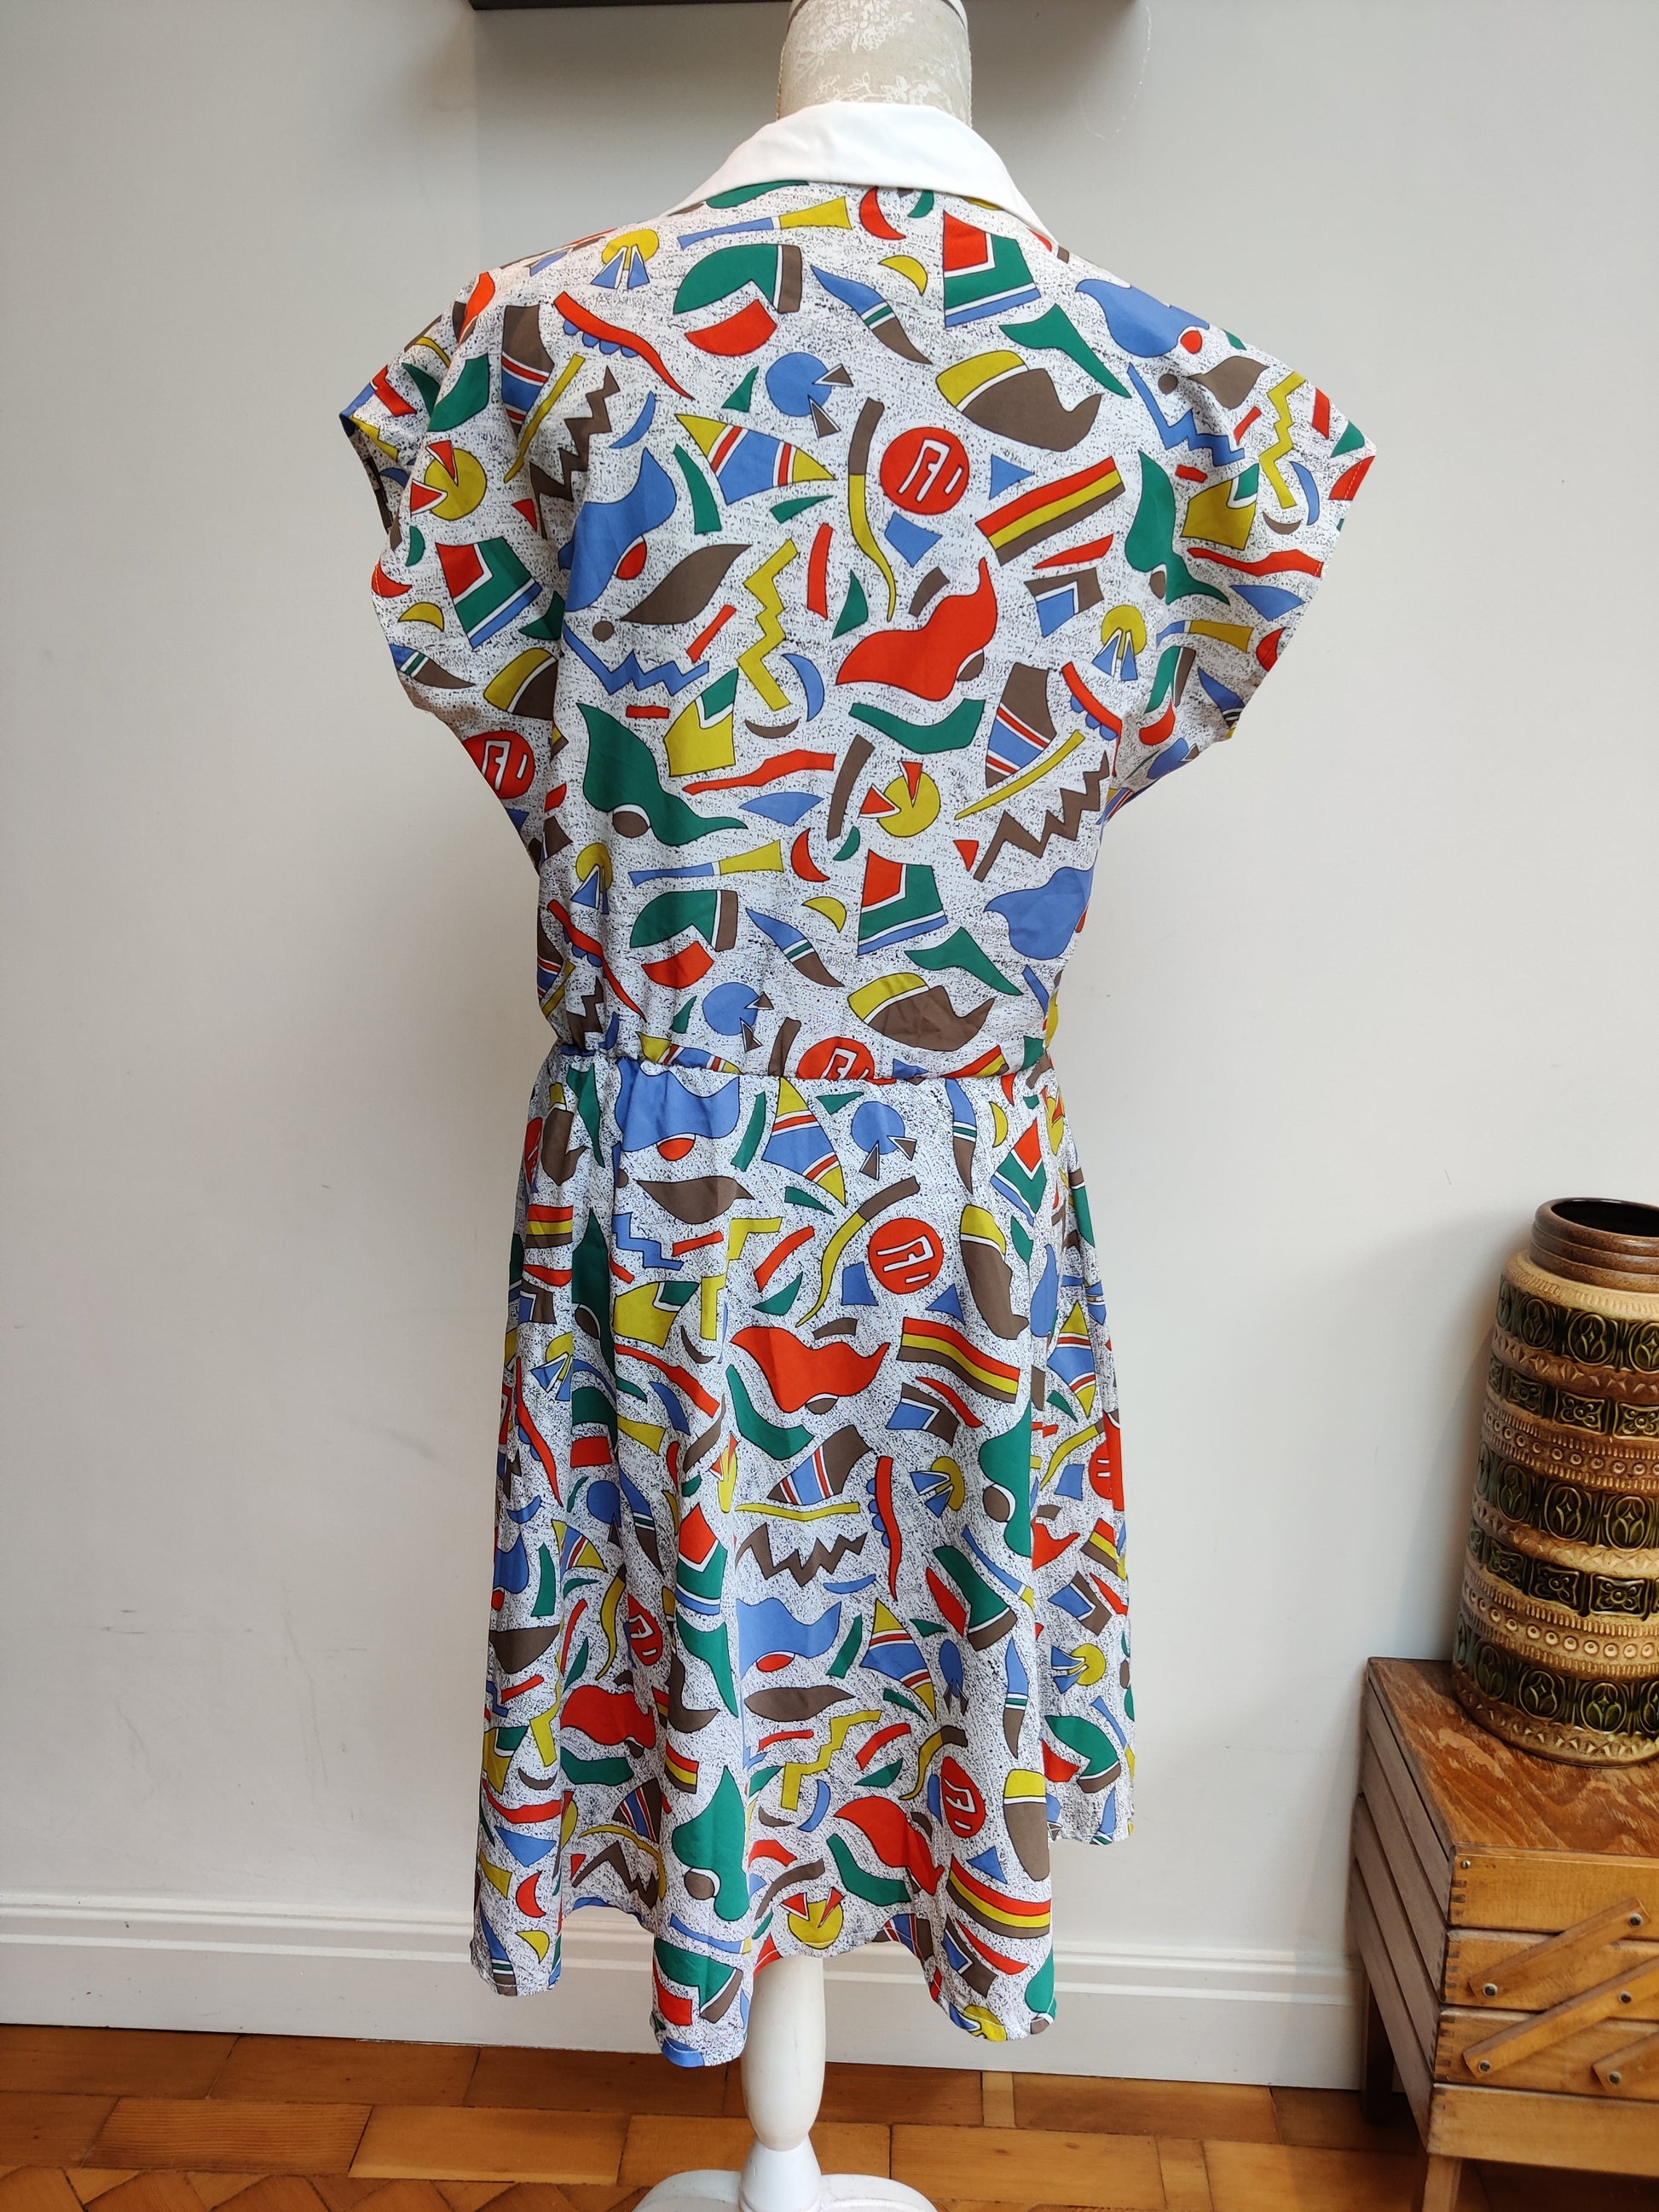 80s patterned dress with collar